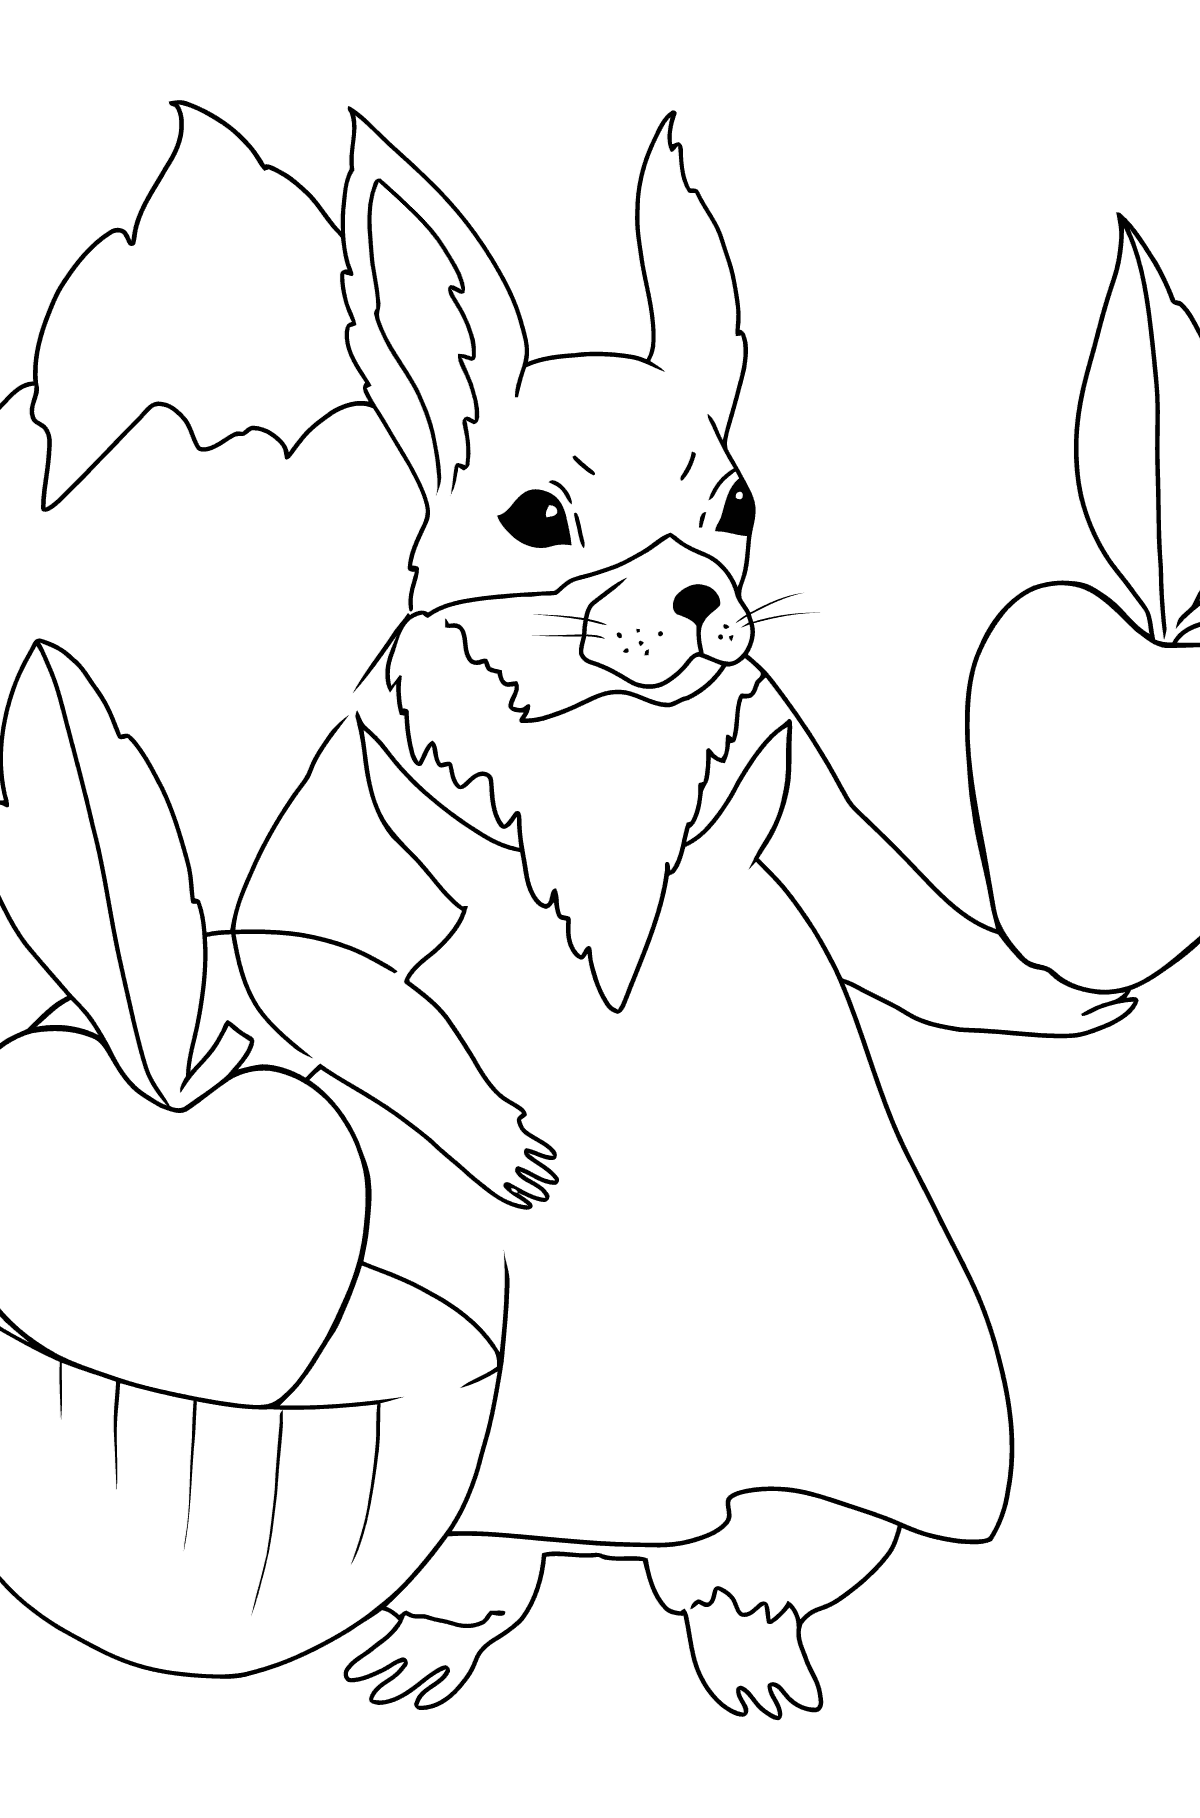 Summer coloring - squirrels - Coloring Pages for Kids